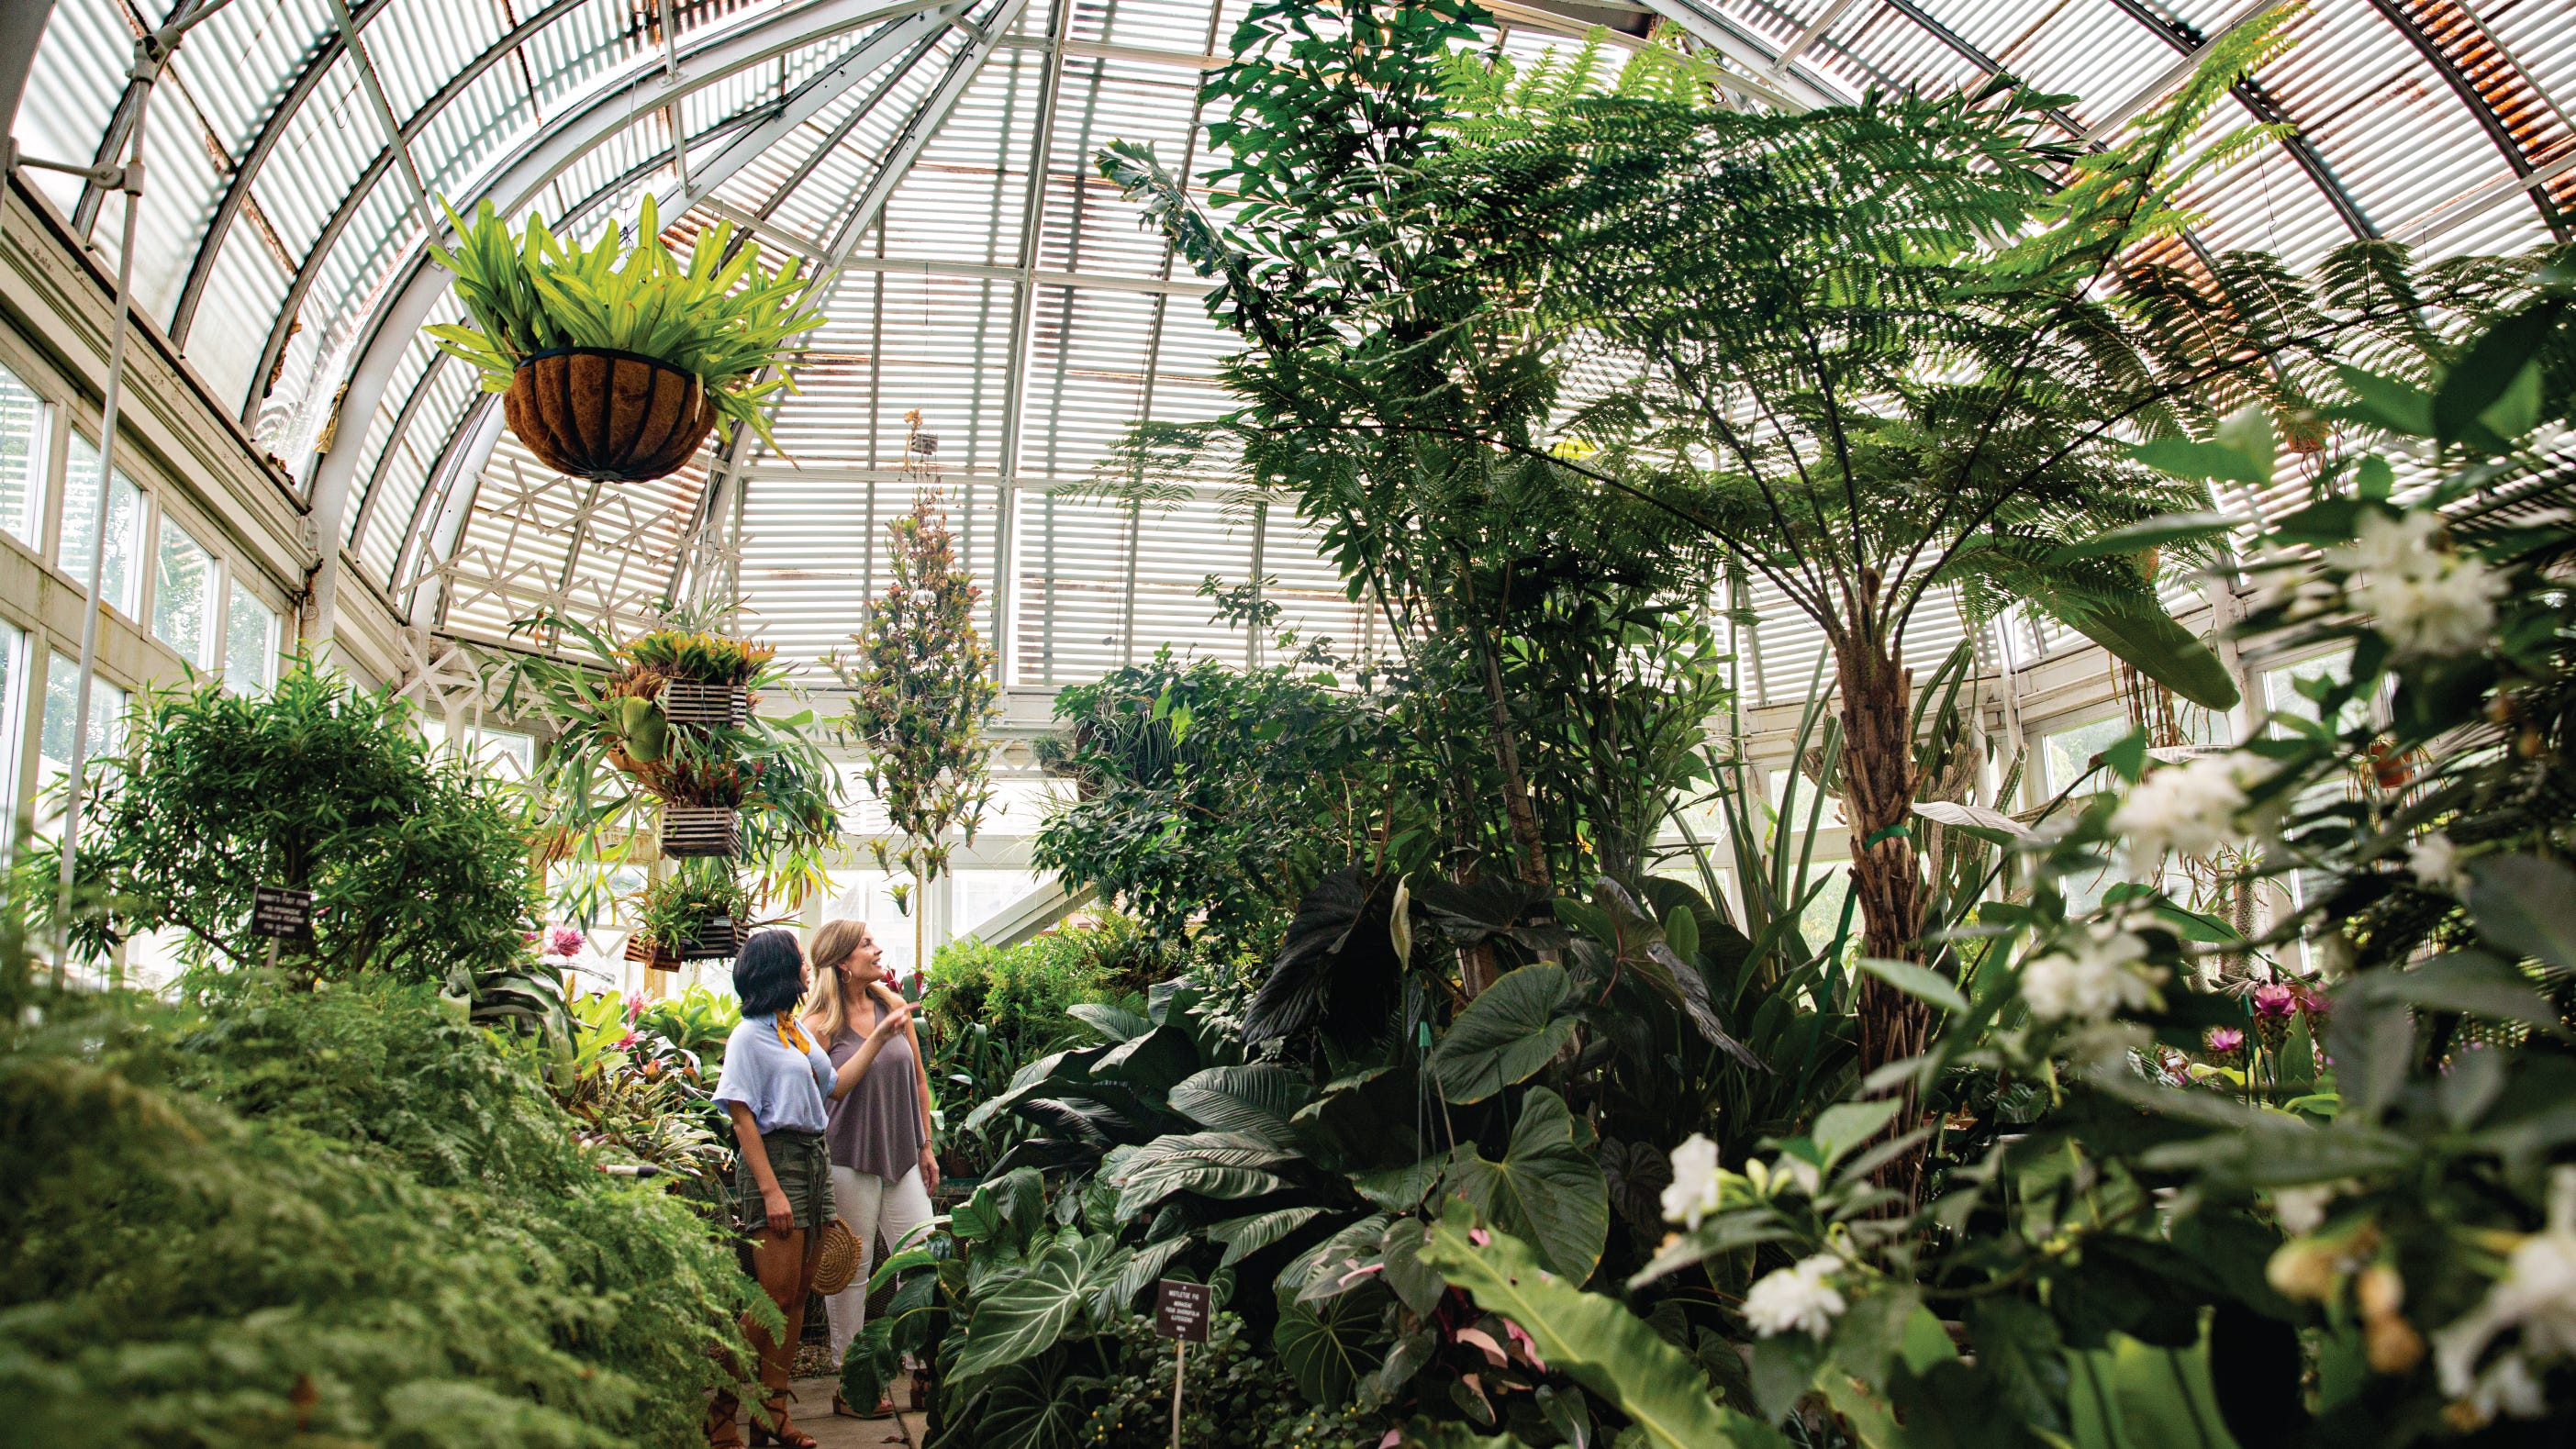   
																What are the Best Botanical Gardens to visit in North Carolina? Here's the top list. 
															 